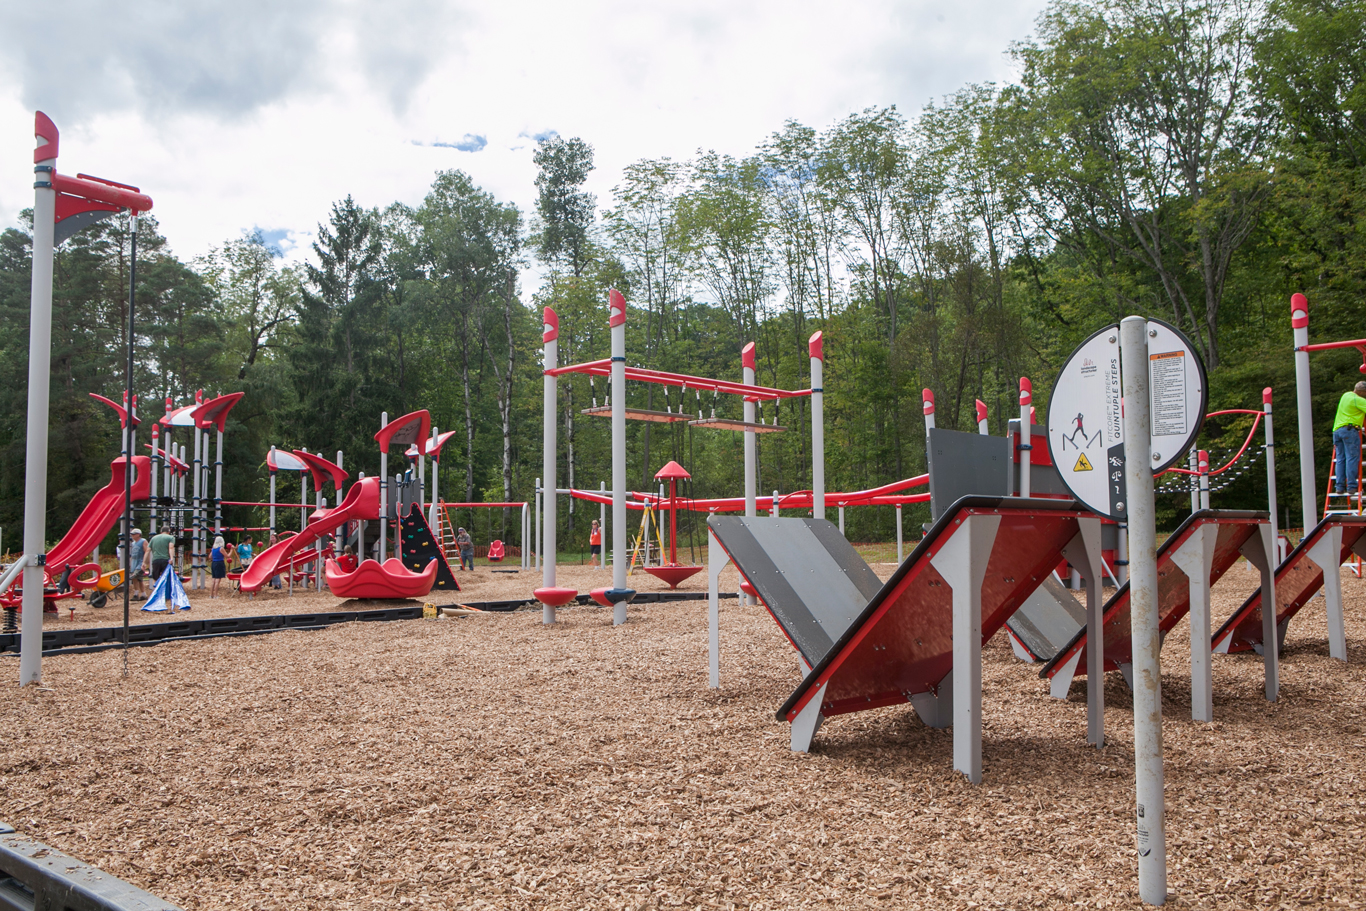 After, a state-of-the-art Adventure Course built by KABOOM!